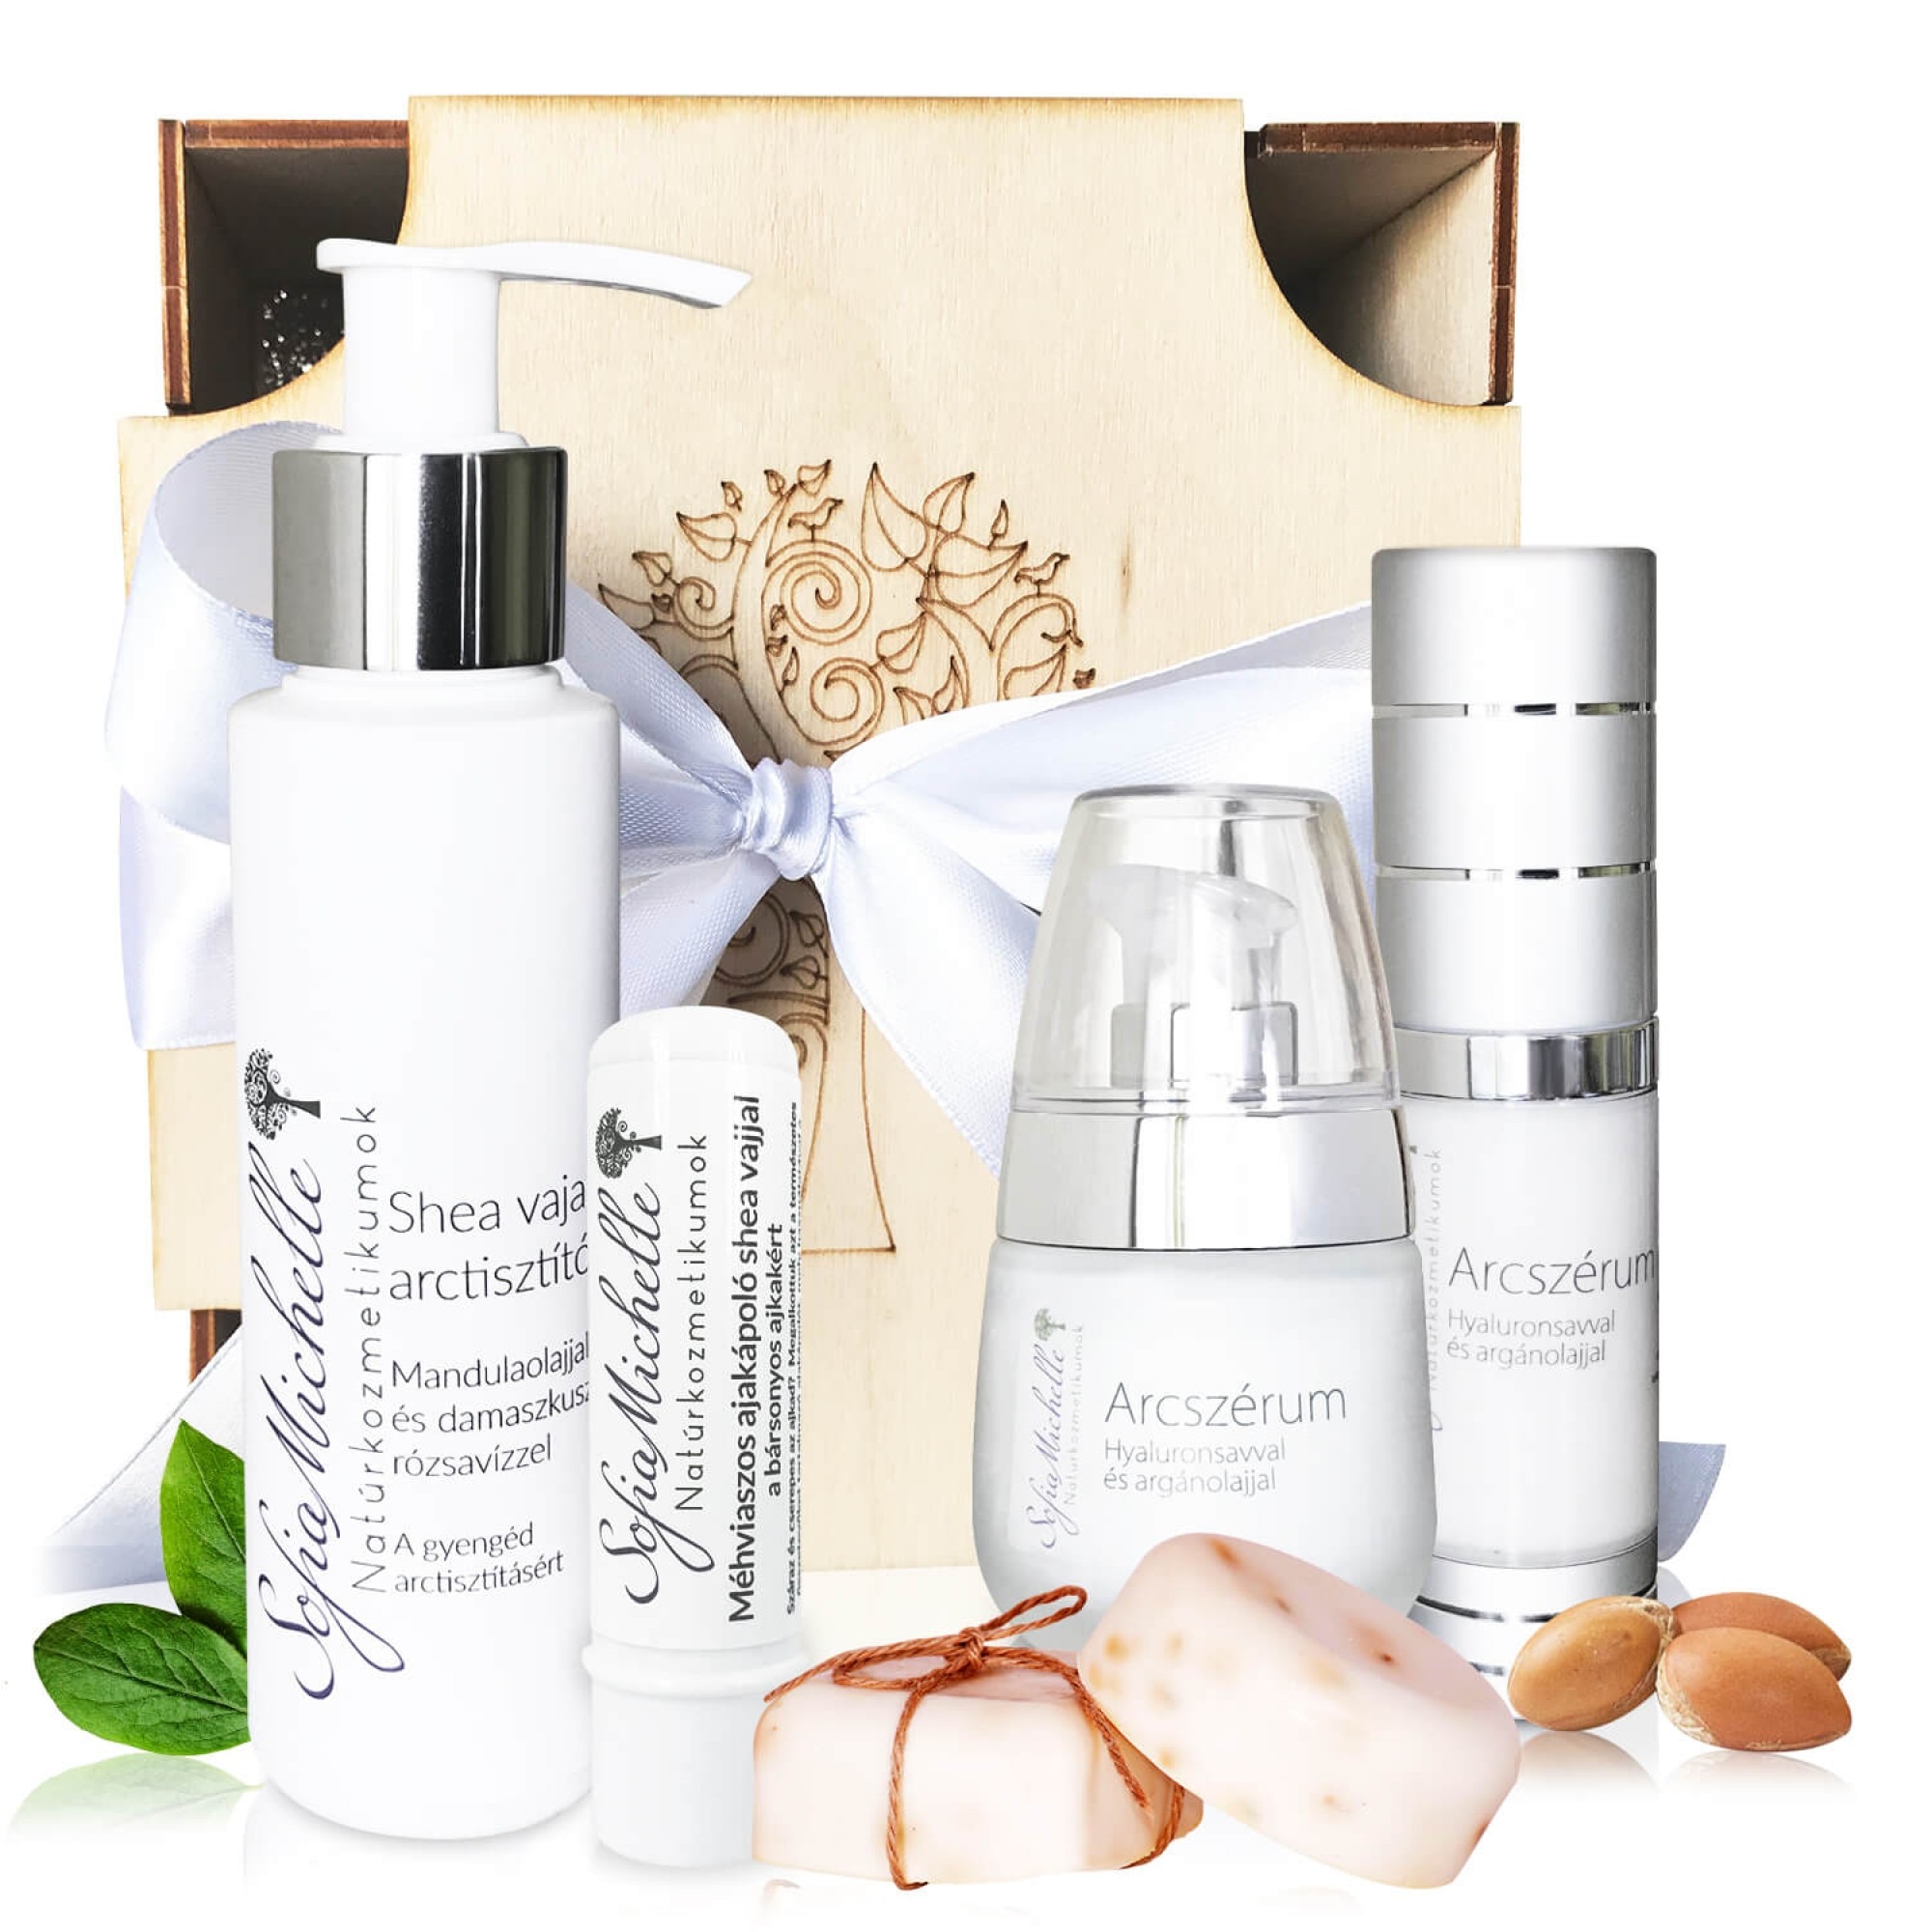 video chase neige suisse anti aging